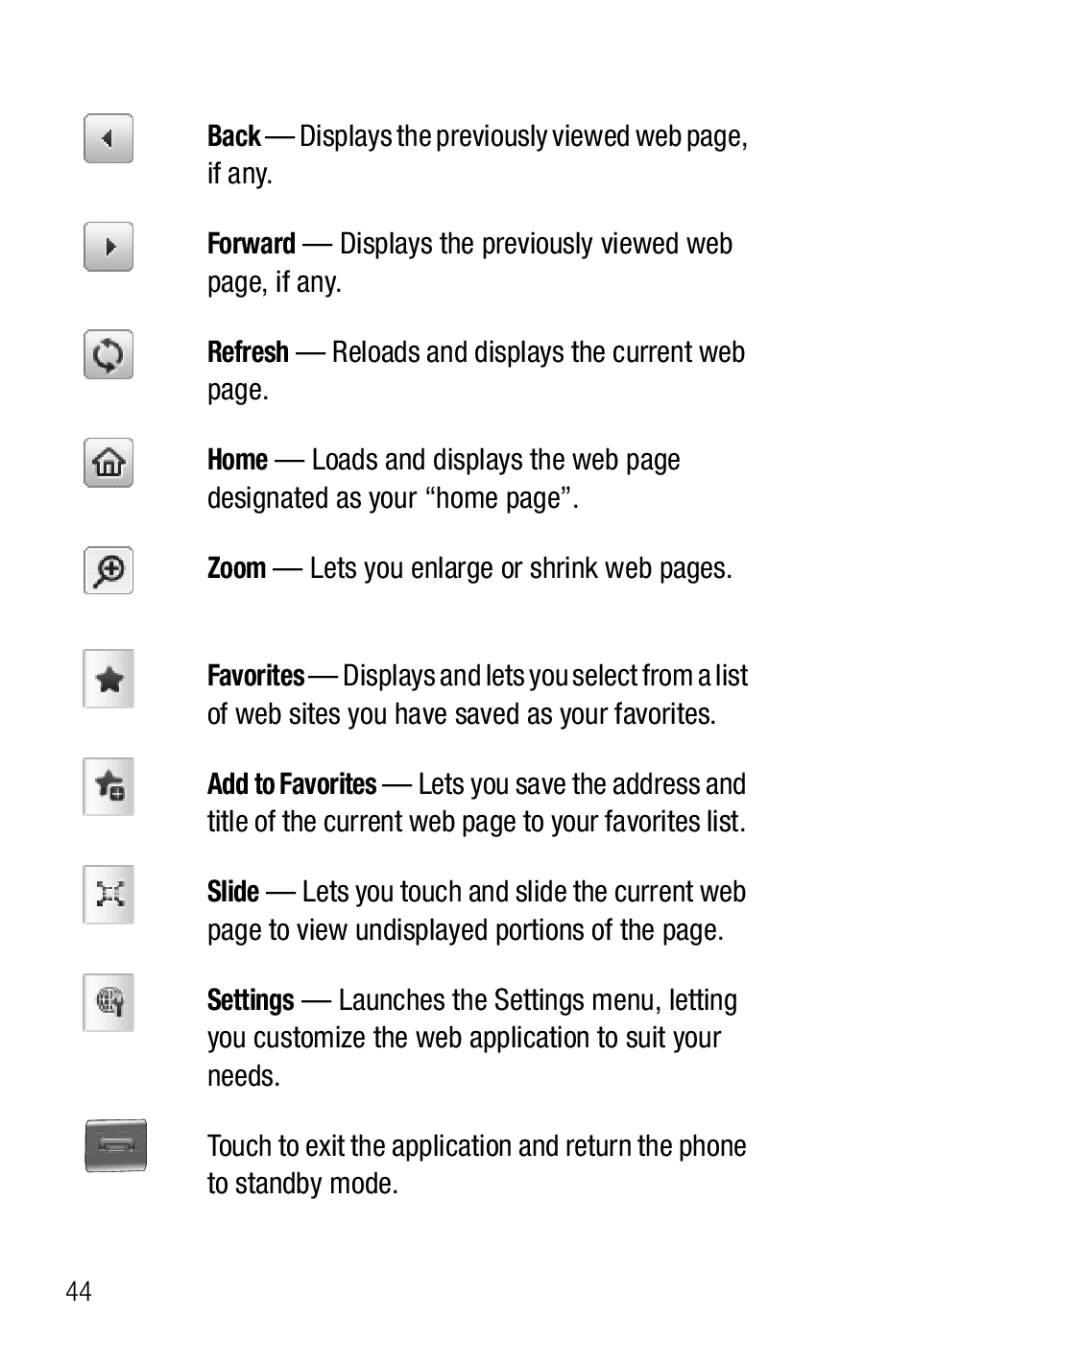 Samsung GH68-25119A user manual Back - Displays the previously viewed web page, if any 